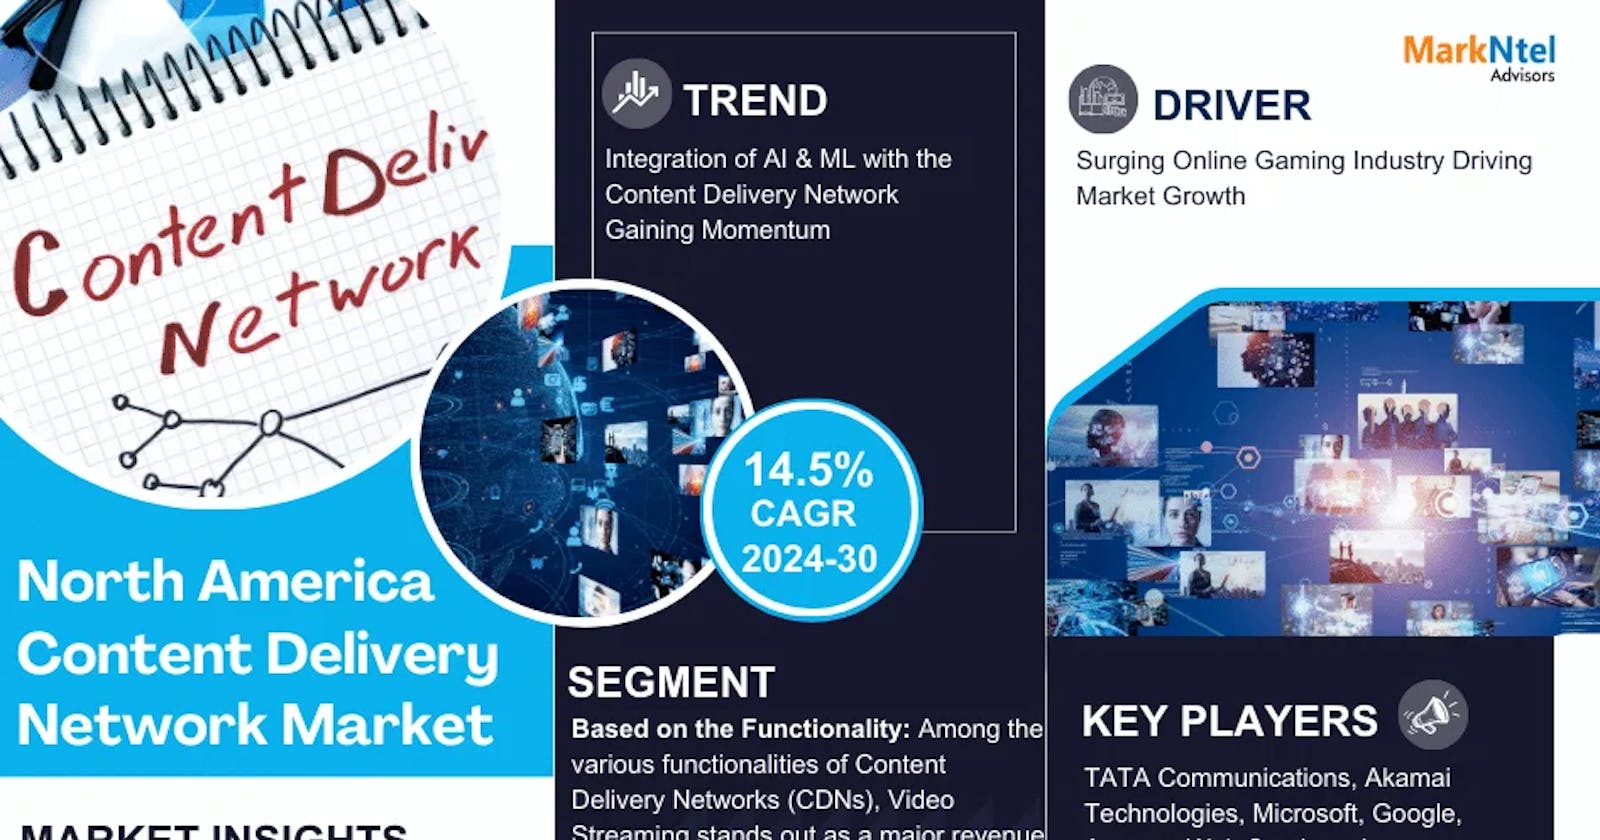 North America Content Delivery Network Market: 14.5% CAGR Expected During 2024-30 Forecast Period